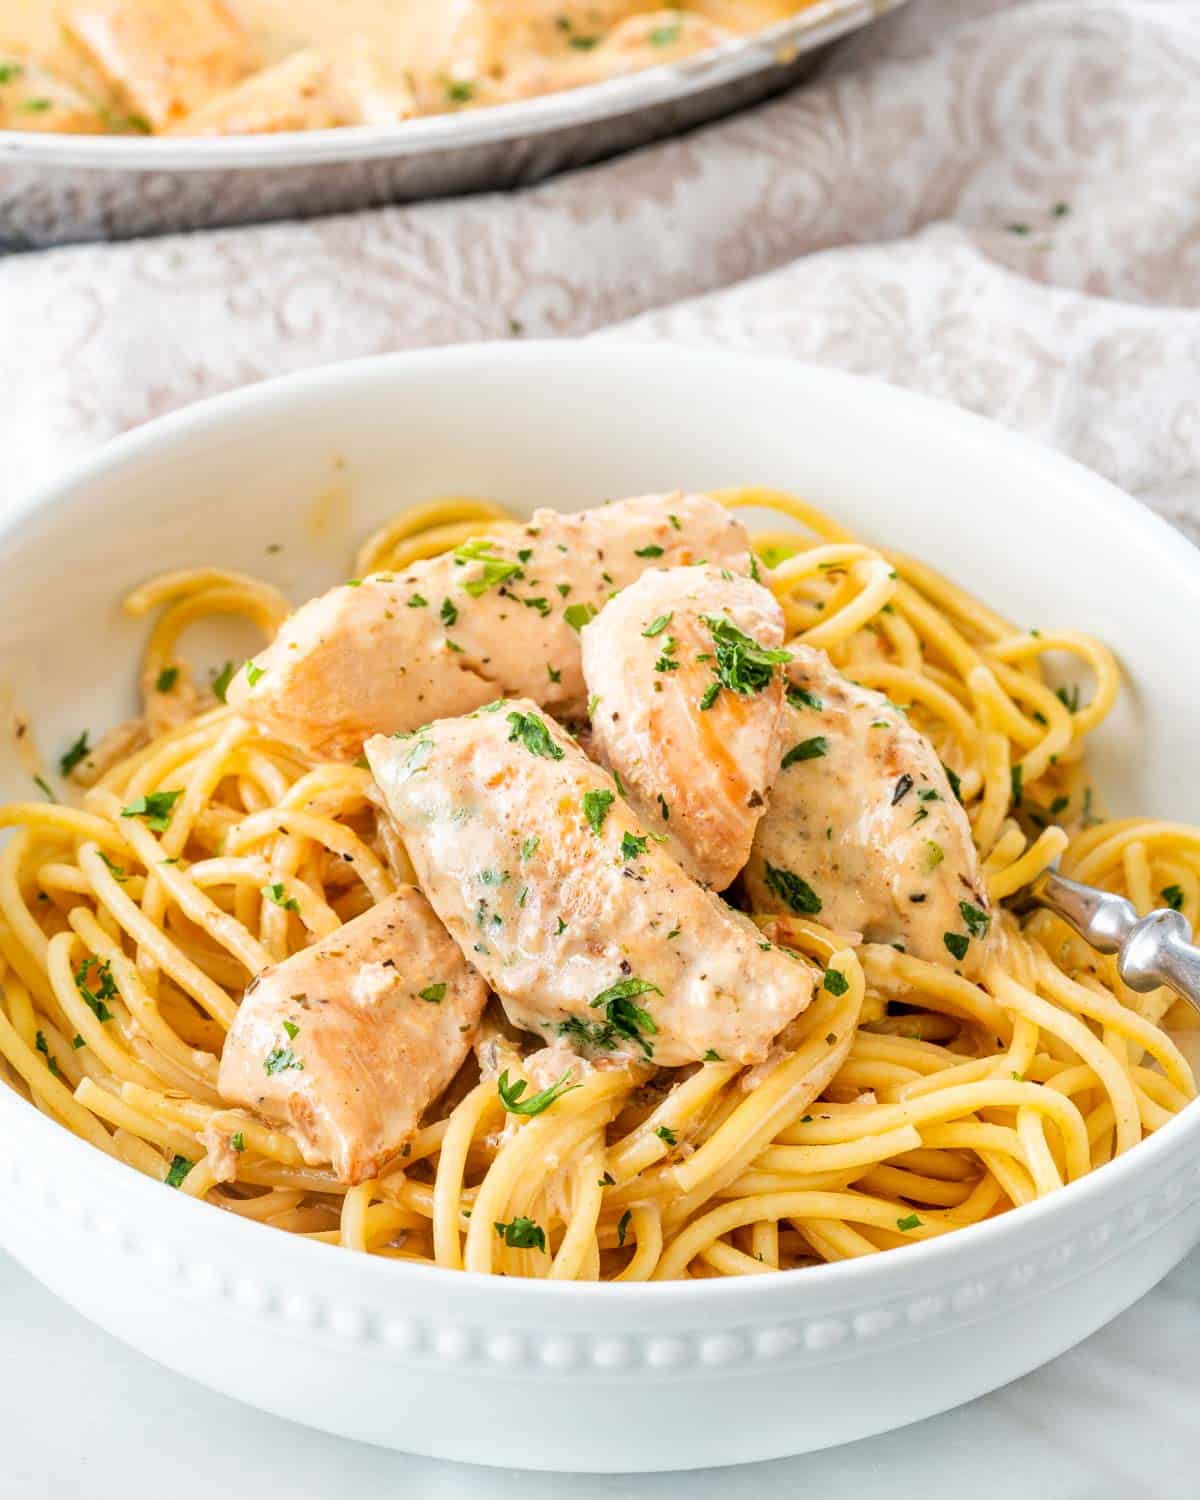 chicken lazone over a bed of spaghetti garnished with parsley.